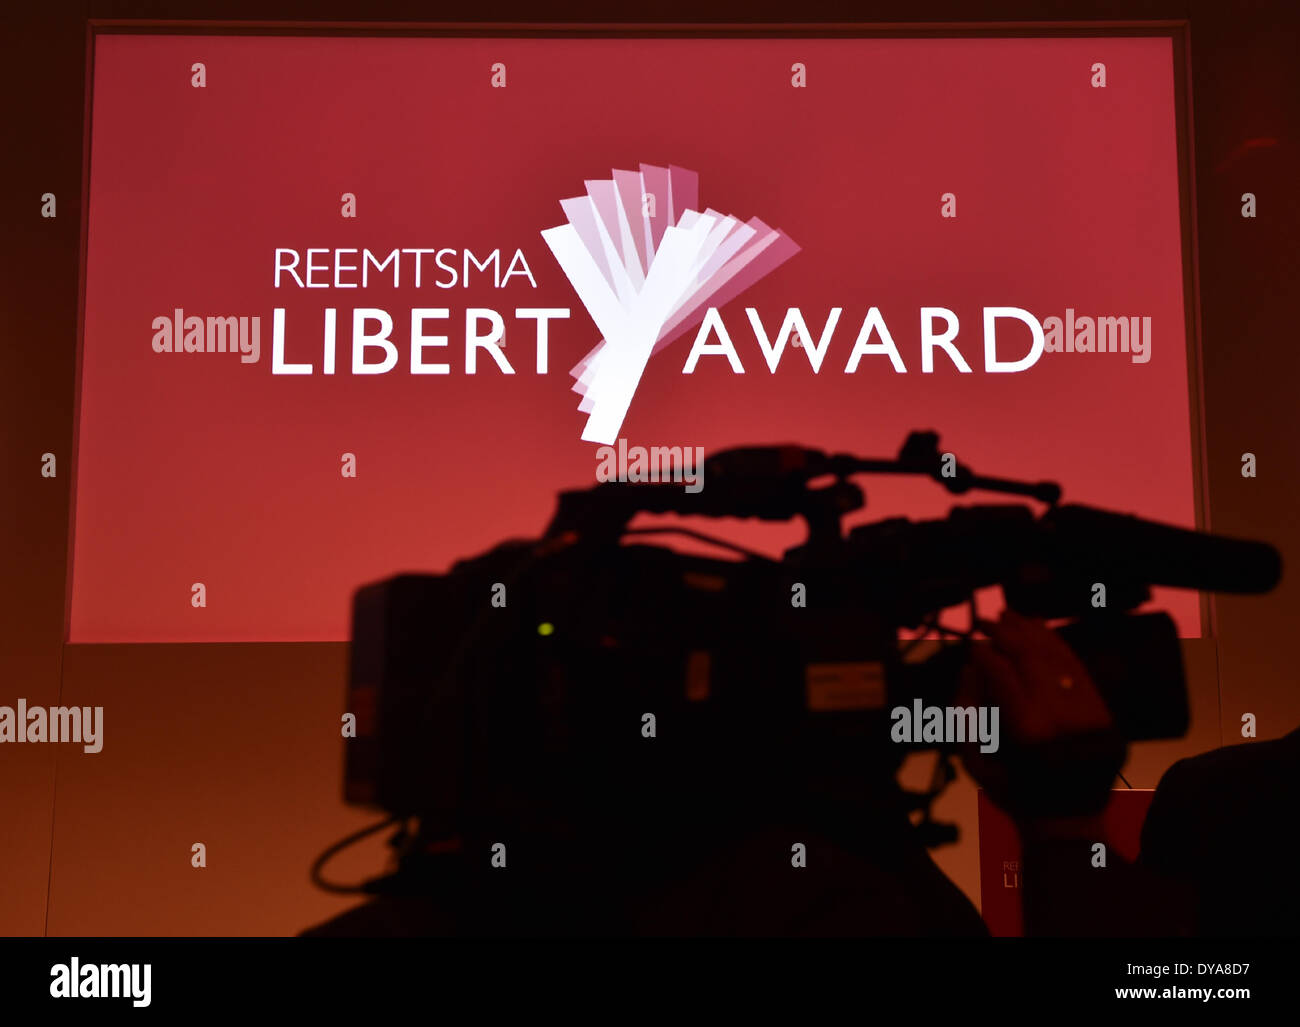 Berlin, Germany. 10th Apr, 2014. The logo 'Reemtsma Liberty Award' is pictured in Berlin, Germany, 10 April 2014. The award savours correspondents and reporters working abroad who have distinguished themselves through their work for liberty. Photo: Jens Kalaene/dpa/Alamy Live News Stock Photo